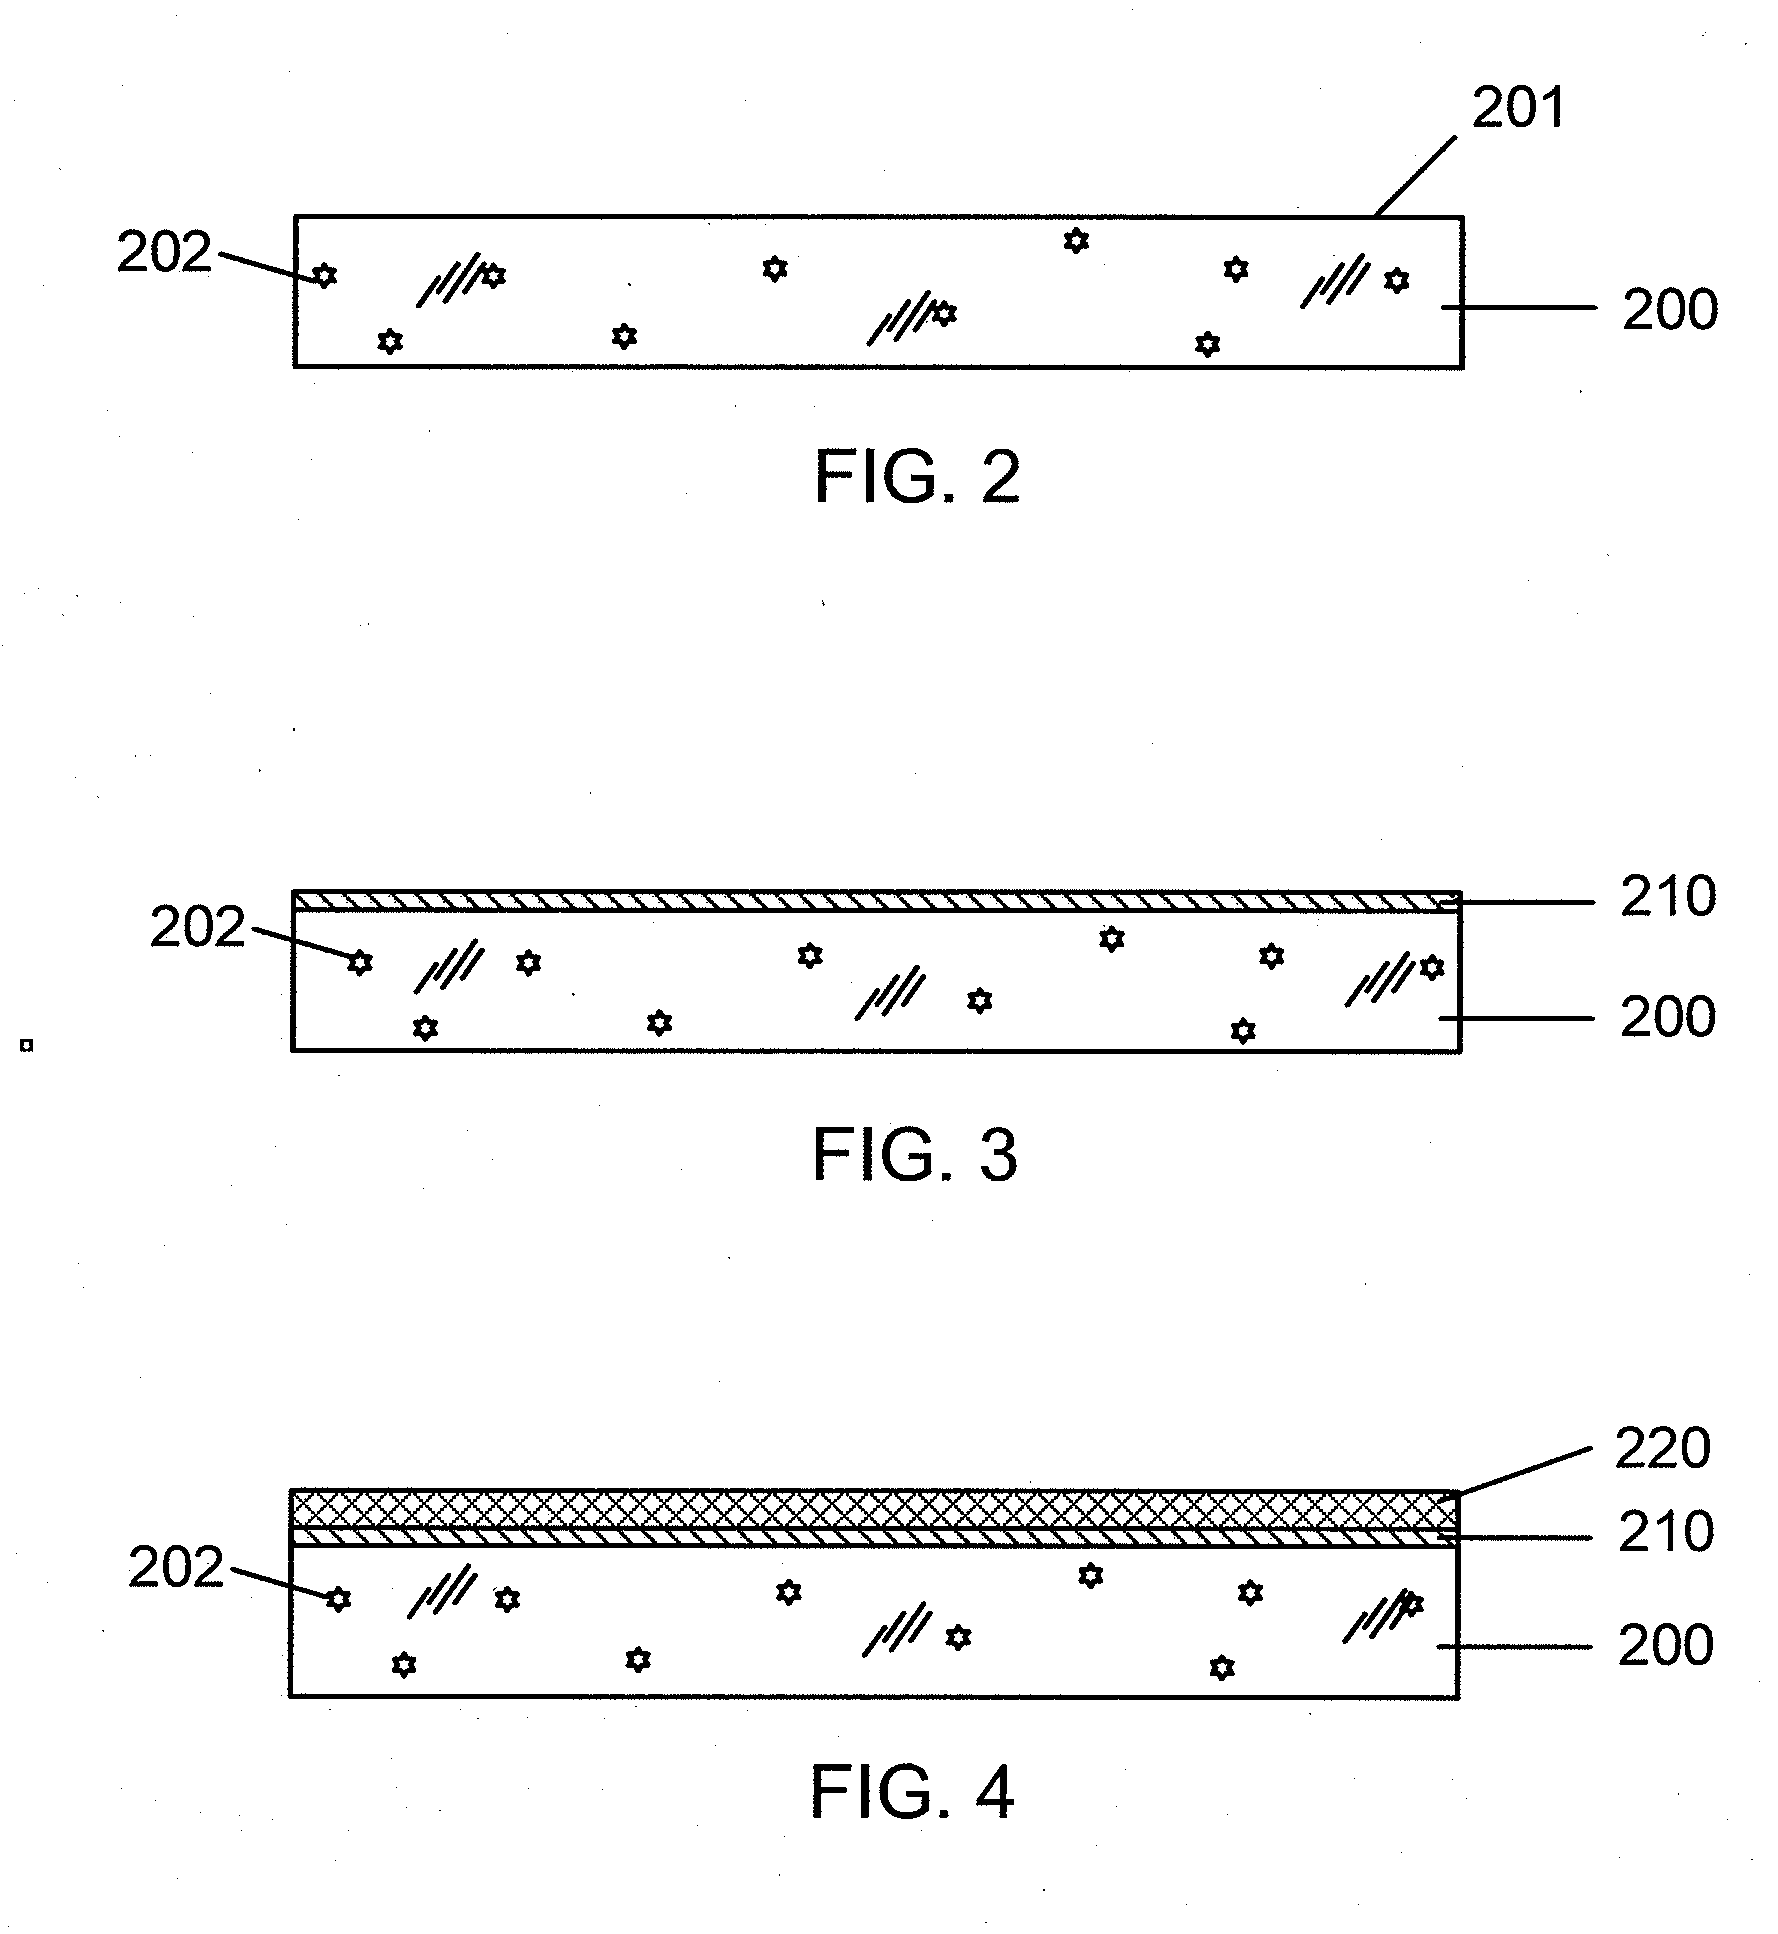 Method of Manufacture of Sodium Doped CIGS/CIGSS Absorber Layers for High Efficiency Photovoltaic Devices